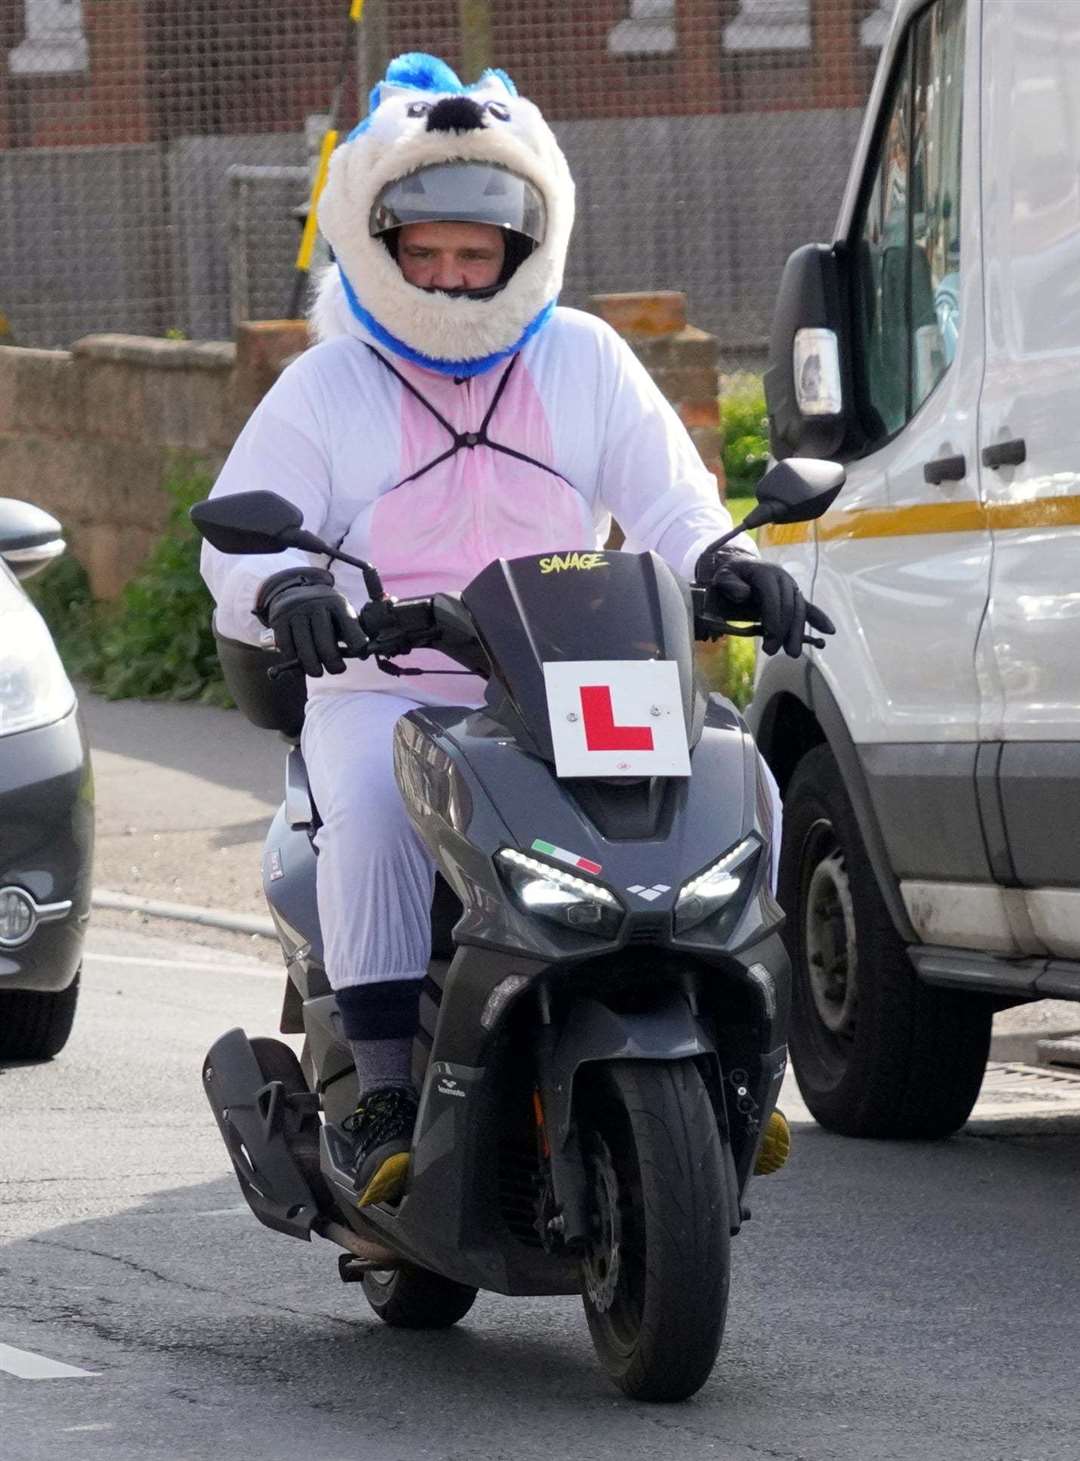 Even learners took part in the Associated Sheppey Bikers' Easter egg run on Sunday. Picture: John Stockham